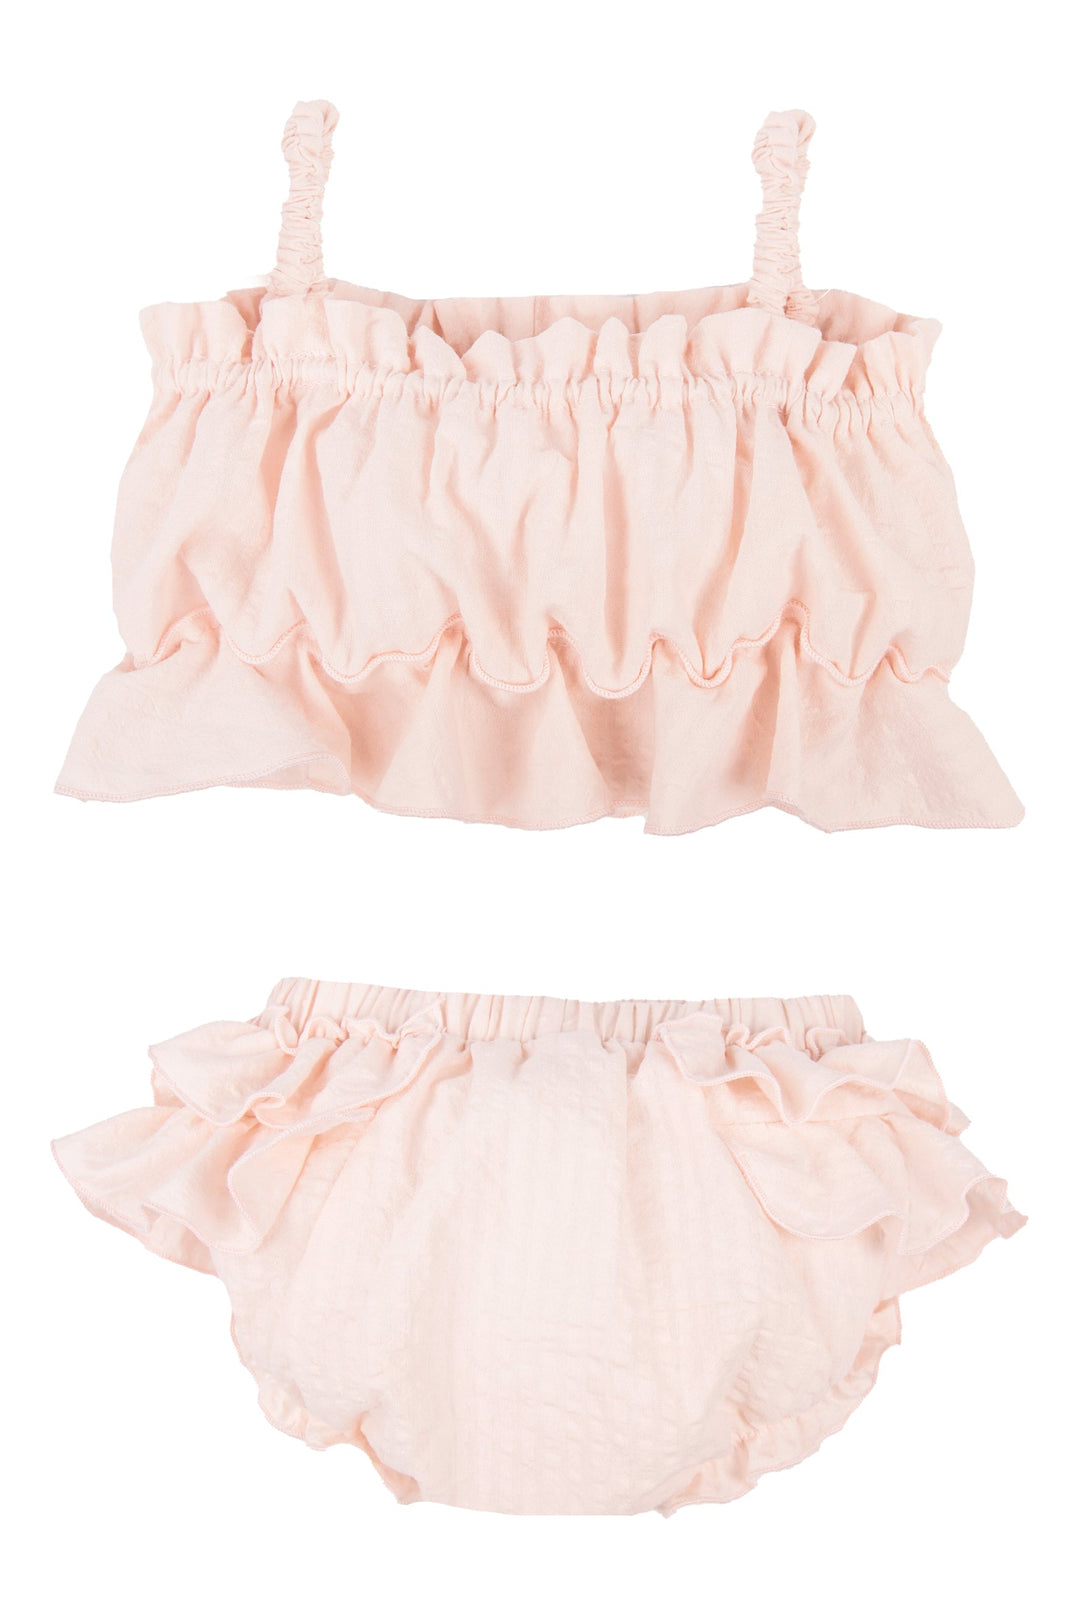 Jamiks "Miki" Apricot Cheesecloth Top & Bloomers | Millie and John